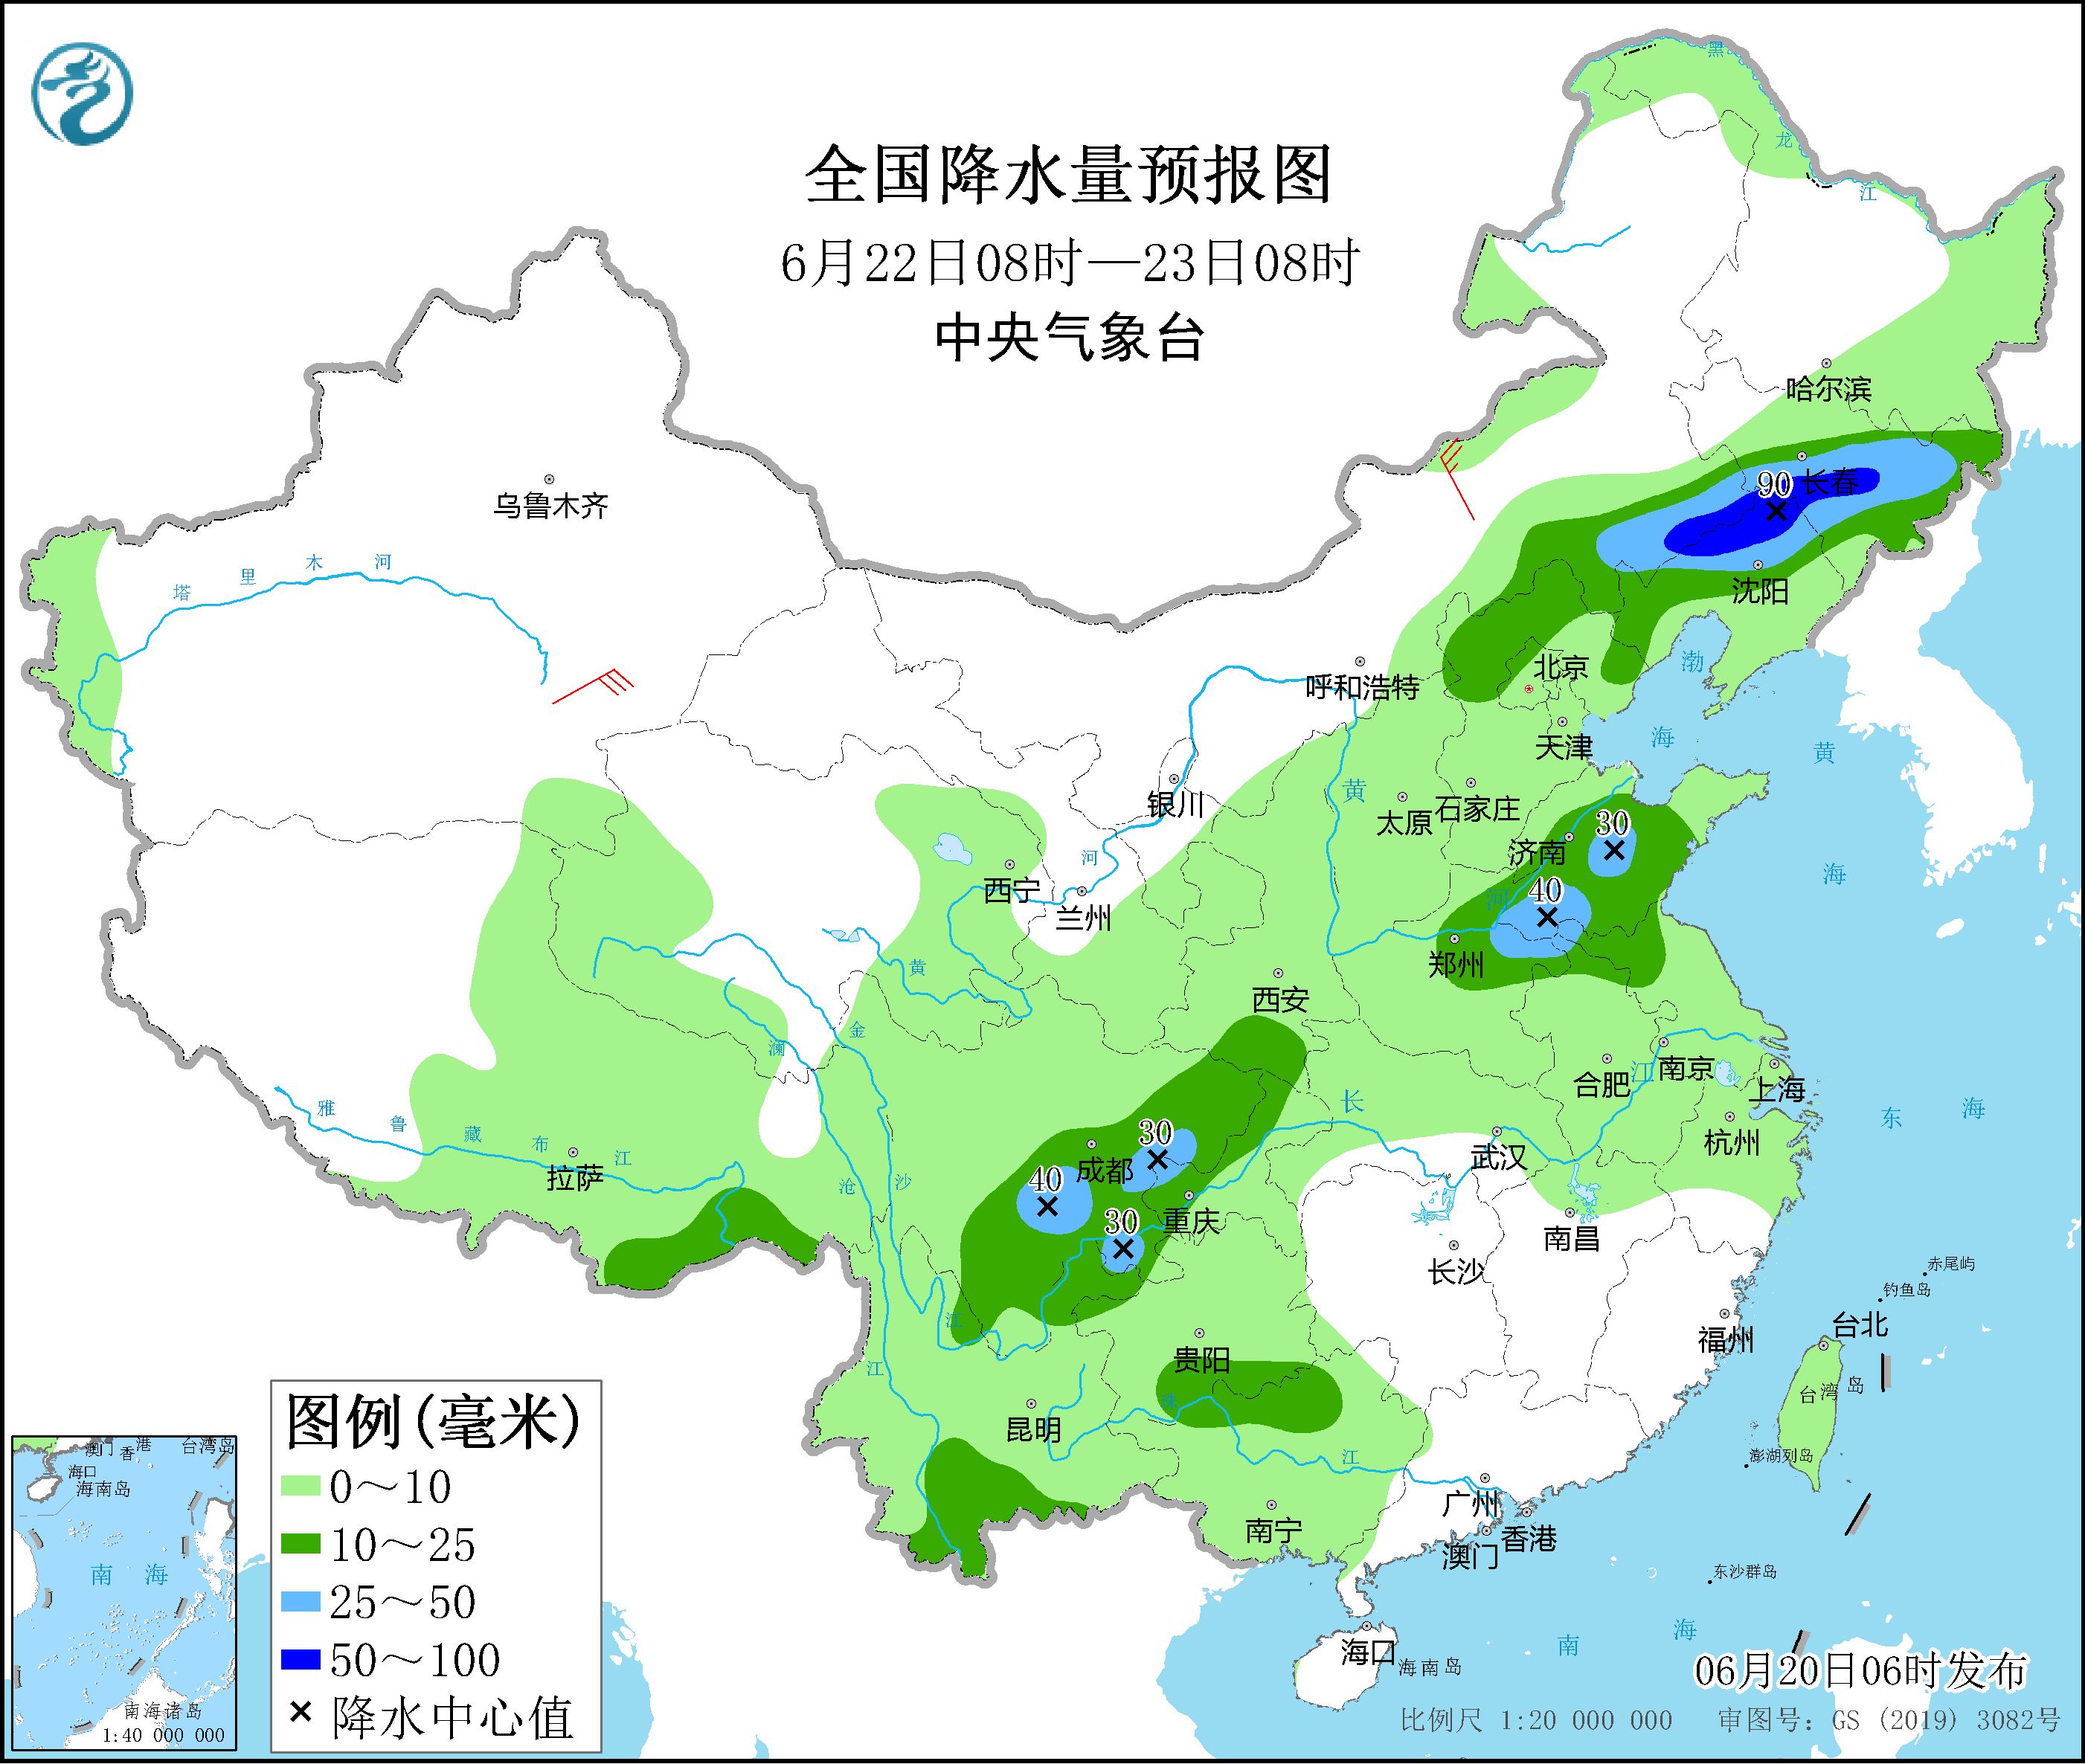 Heavy rainfall in Jiangnan, South China and other places, strong convection in Northeast Inner Mongolia, strong convection in North China, Huanghuai and other places, high temperature weather continues